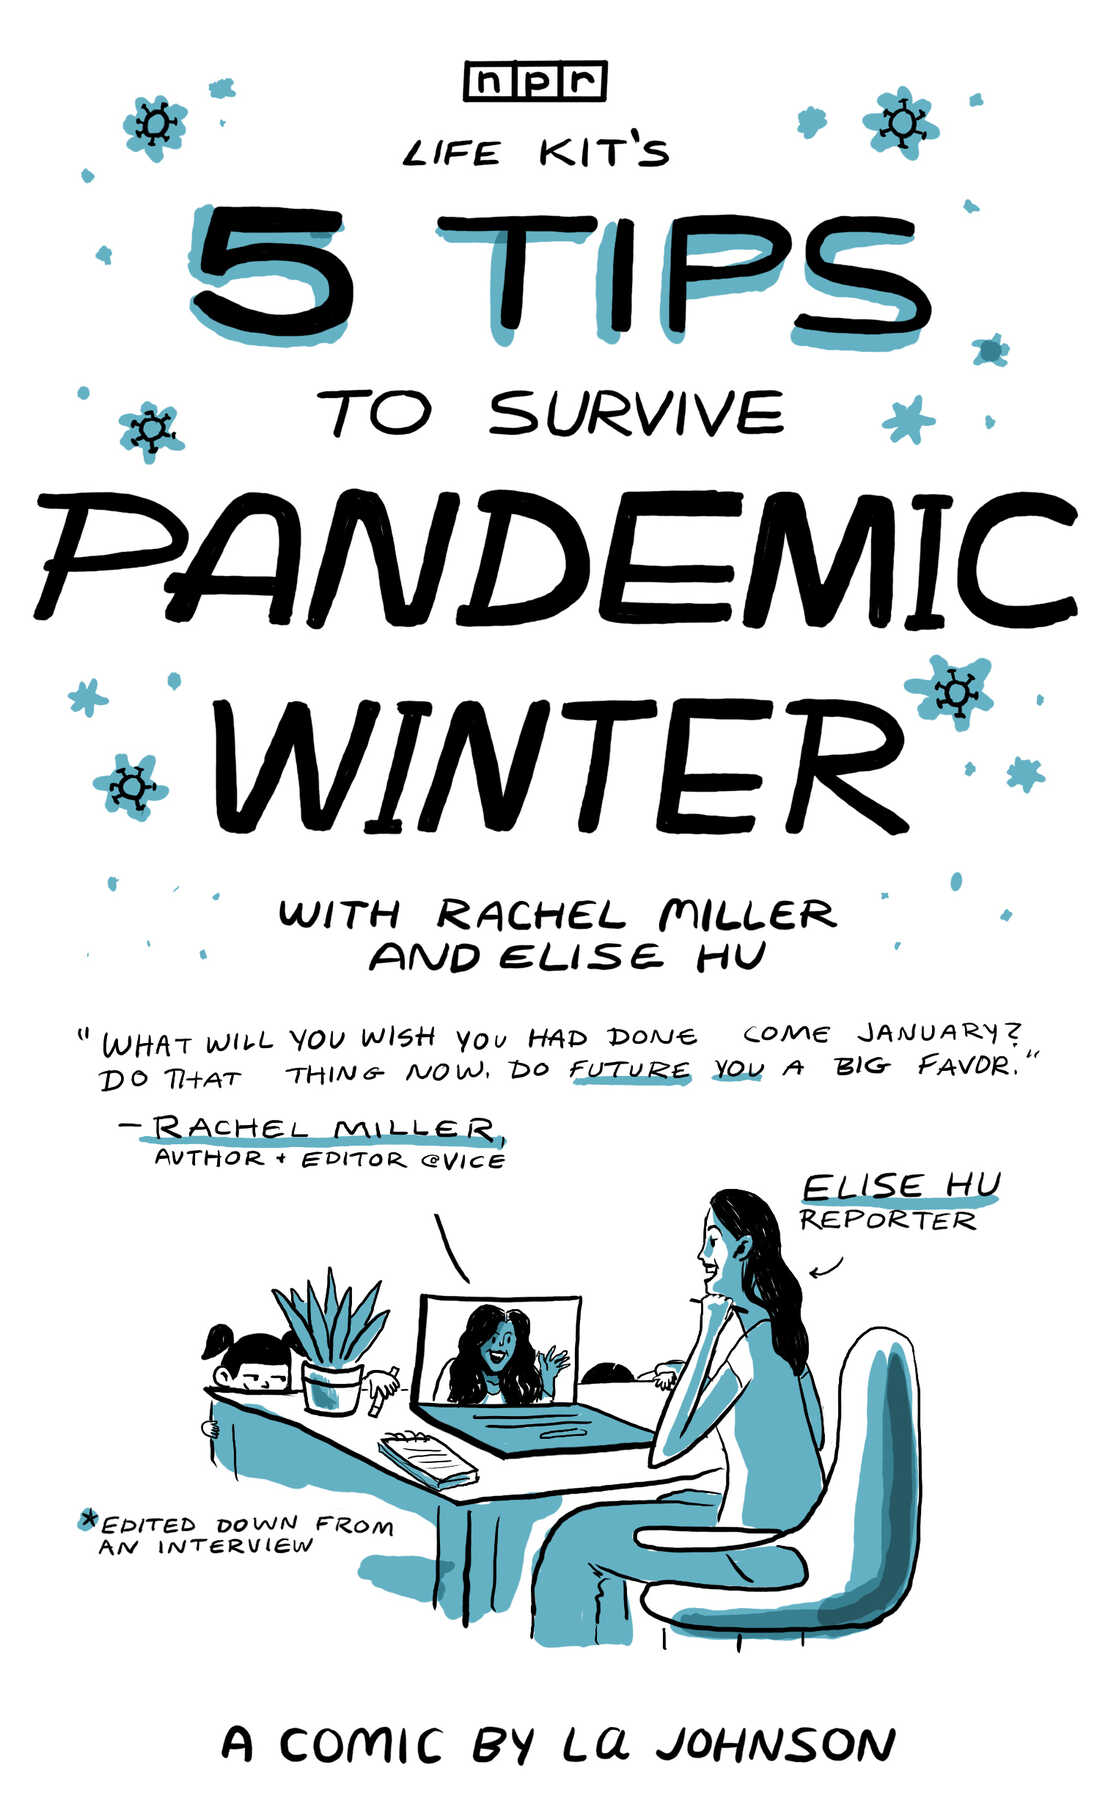 Life Kit's 5 Tips For Preparing For Pandemic Winter, from Rachel Miller and Elise Hu. Based on an interview between reporter Elise Hu and VICE journalist and author Rachel Miller.